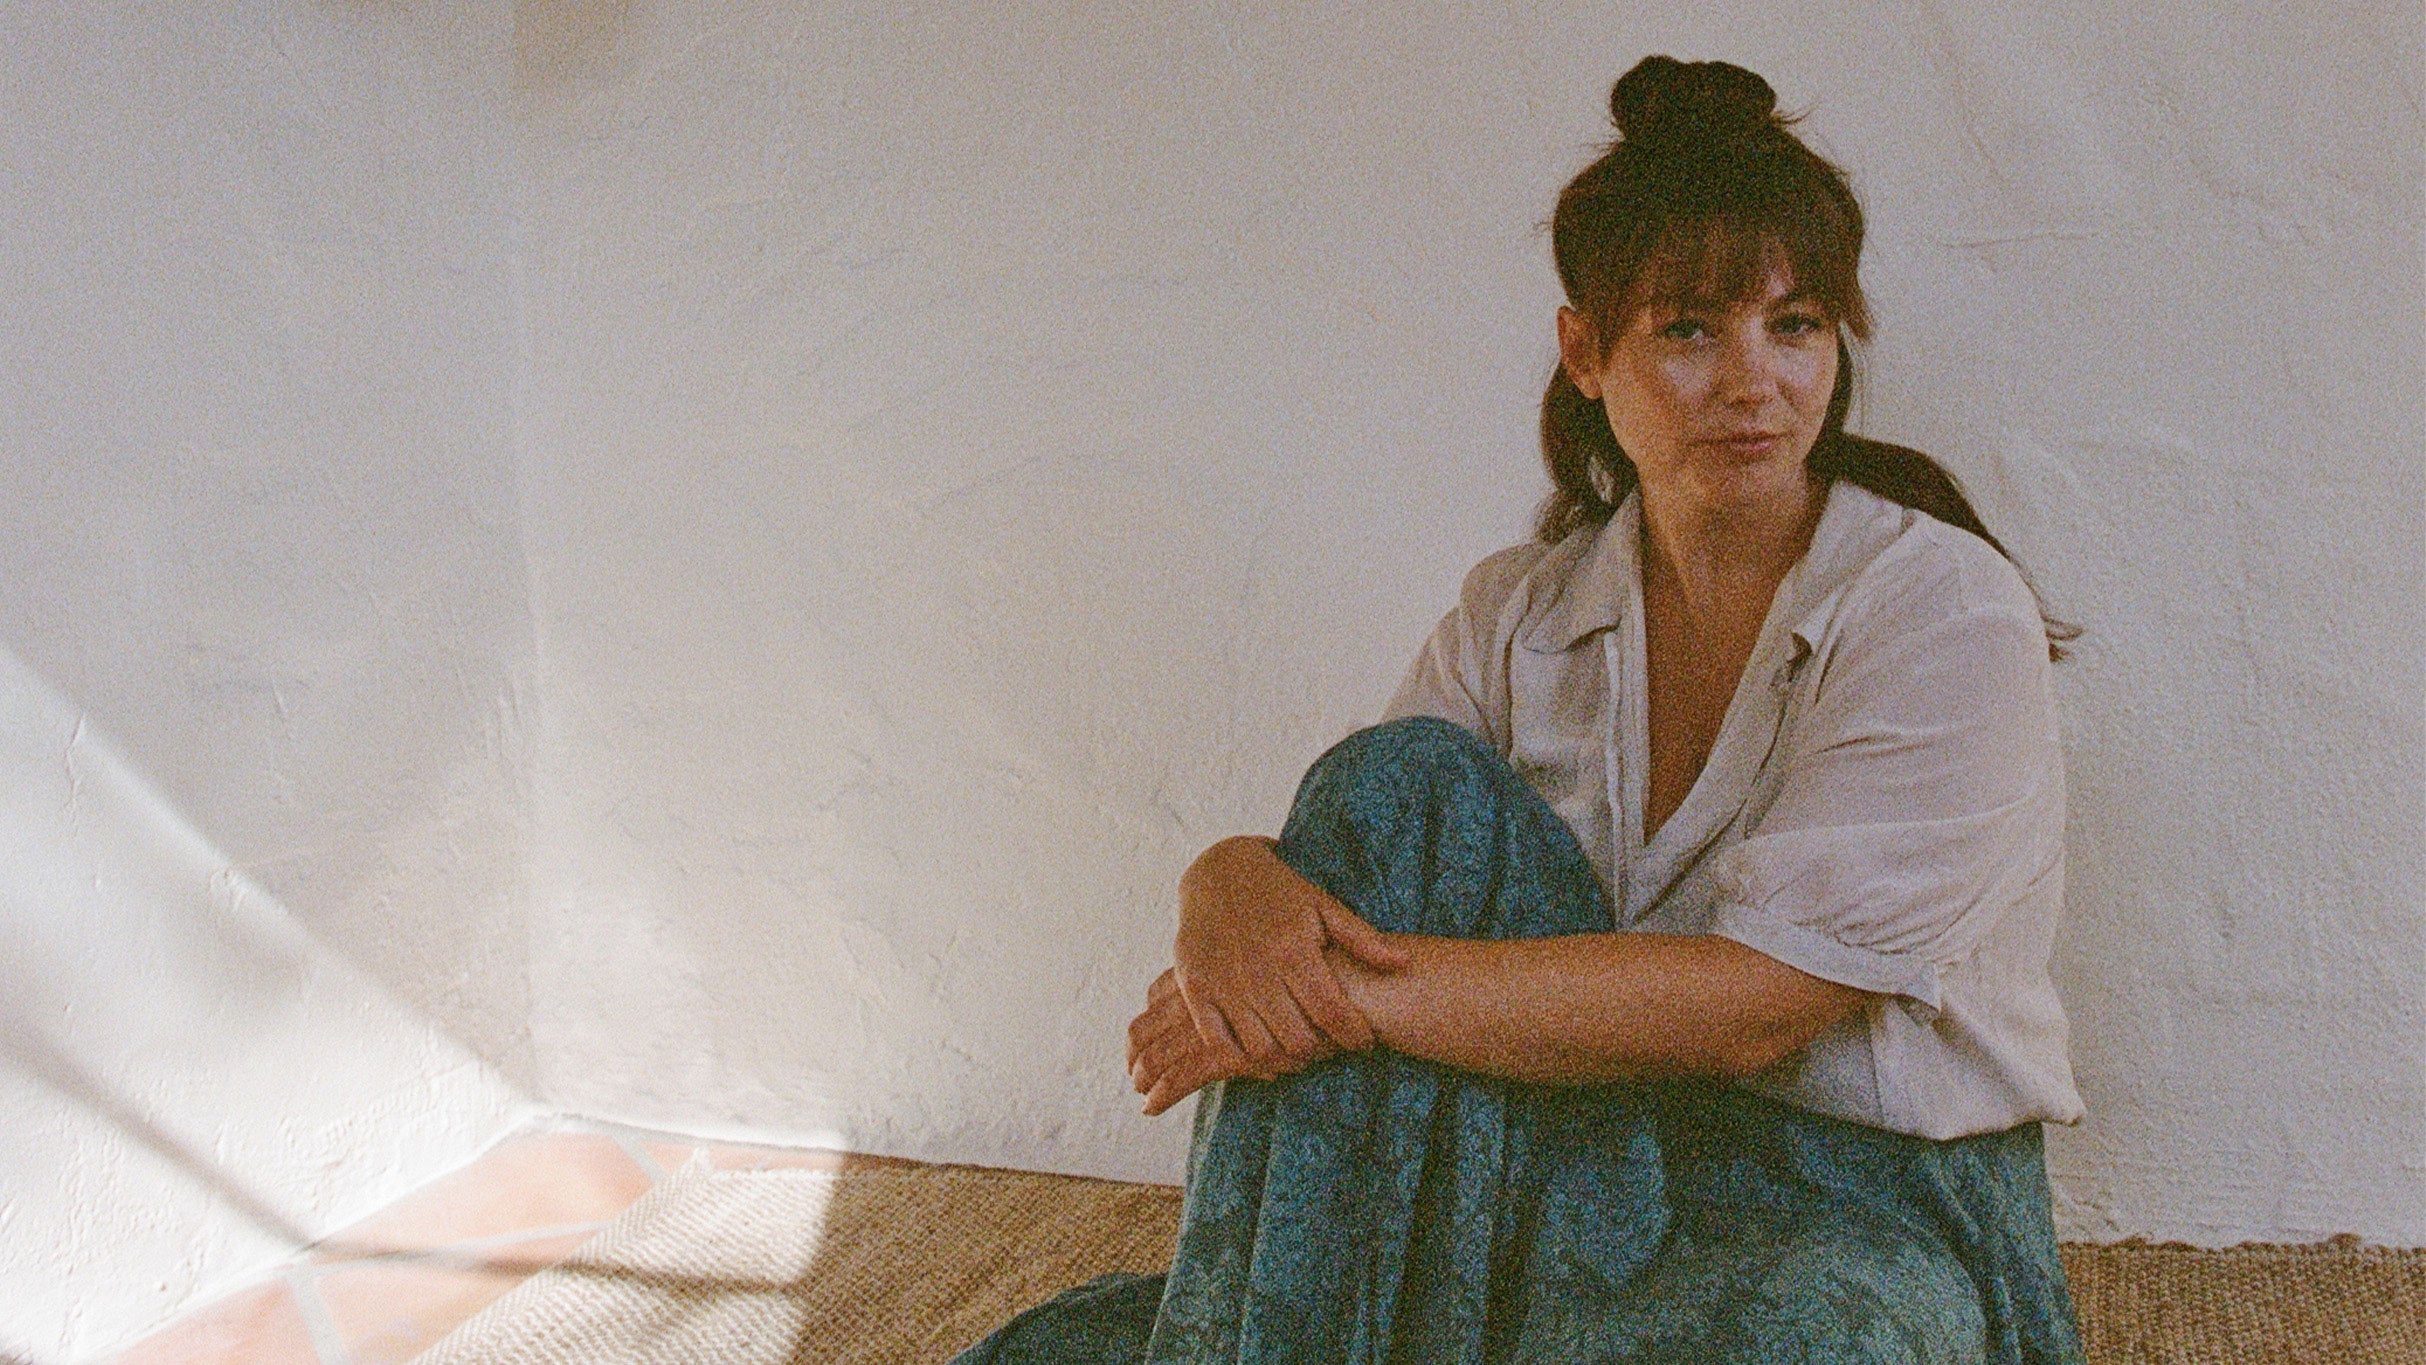 Angel Olsen (Solo): Songs From The Archive in Red Bank promo photo for Spotify presale offer code